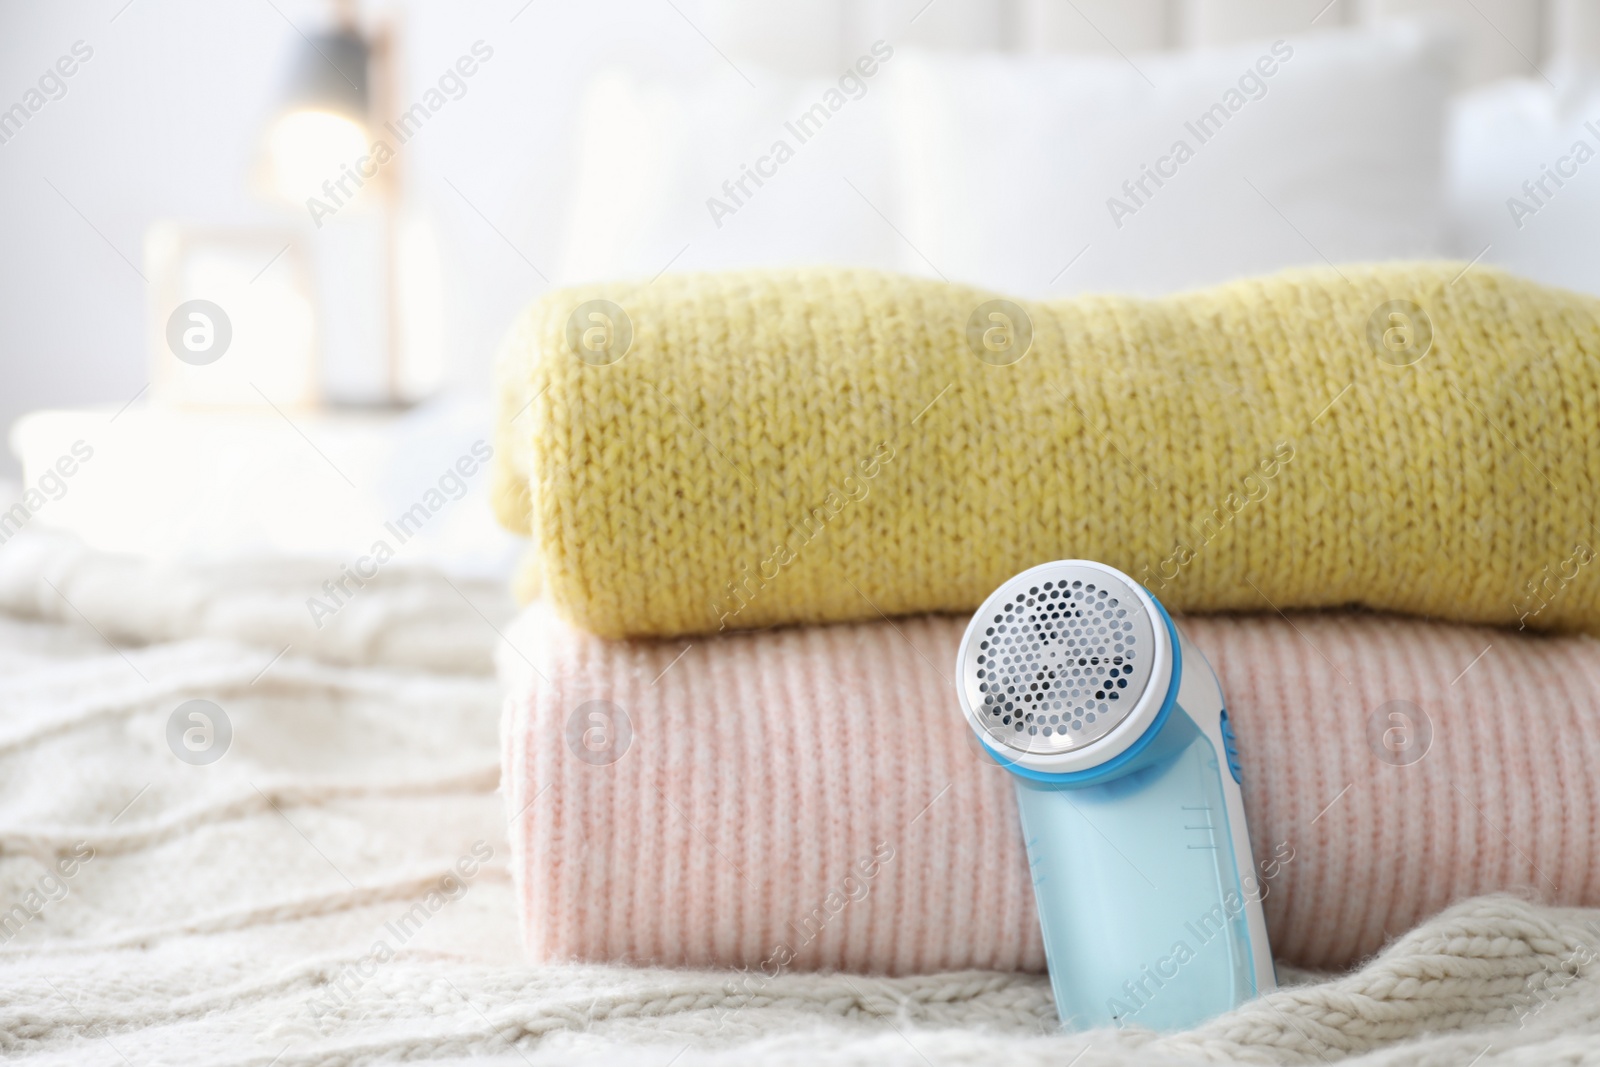 Photo of Modern fabric shaver and woolen sweaters on bed indoors, closeup